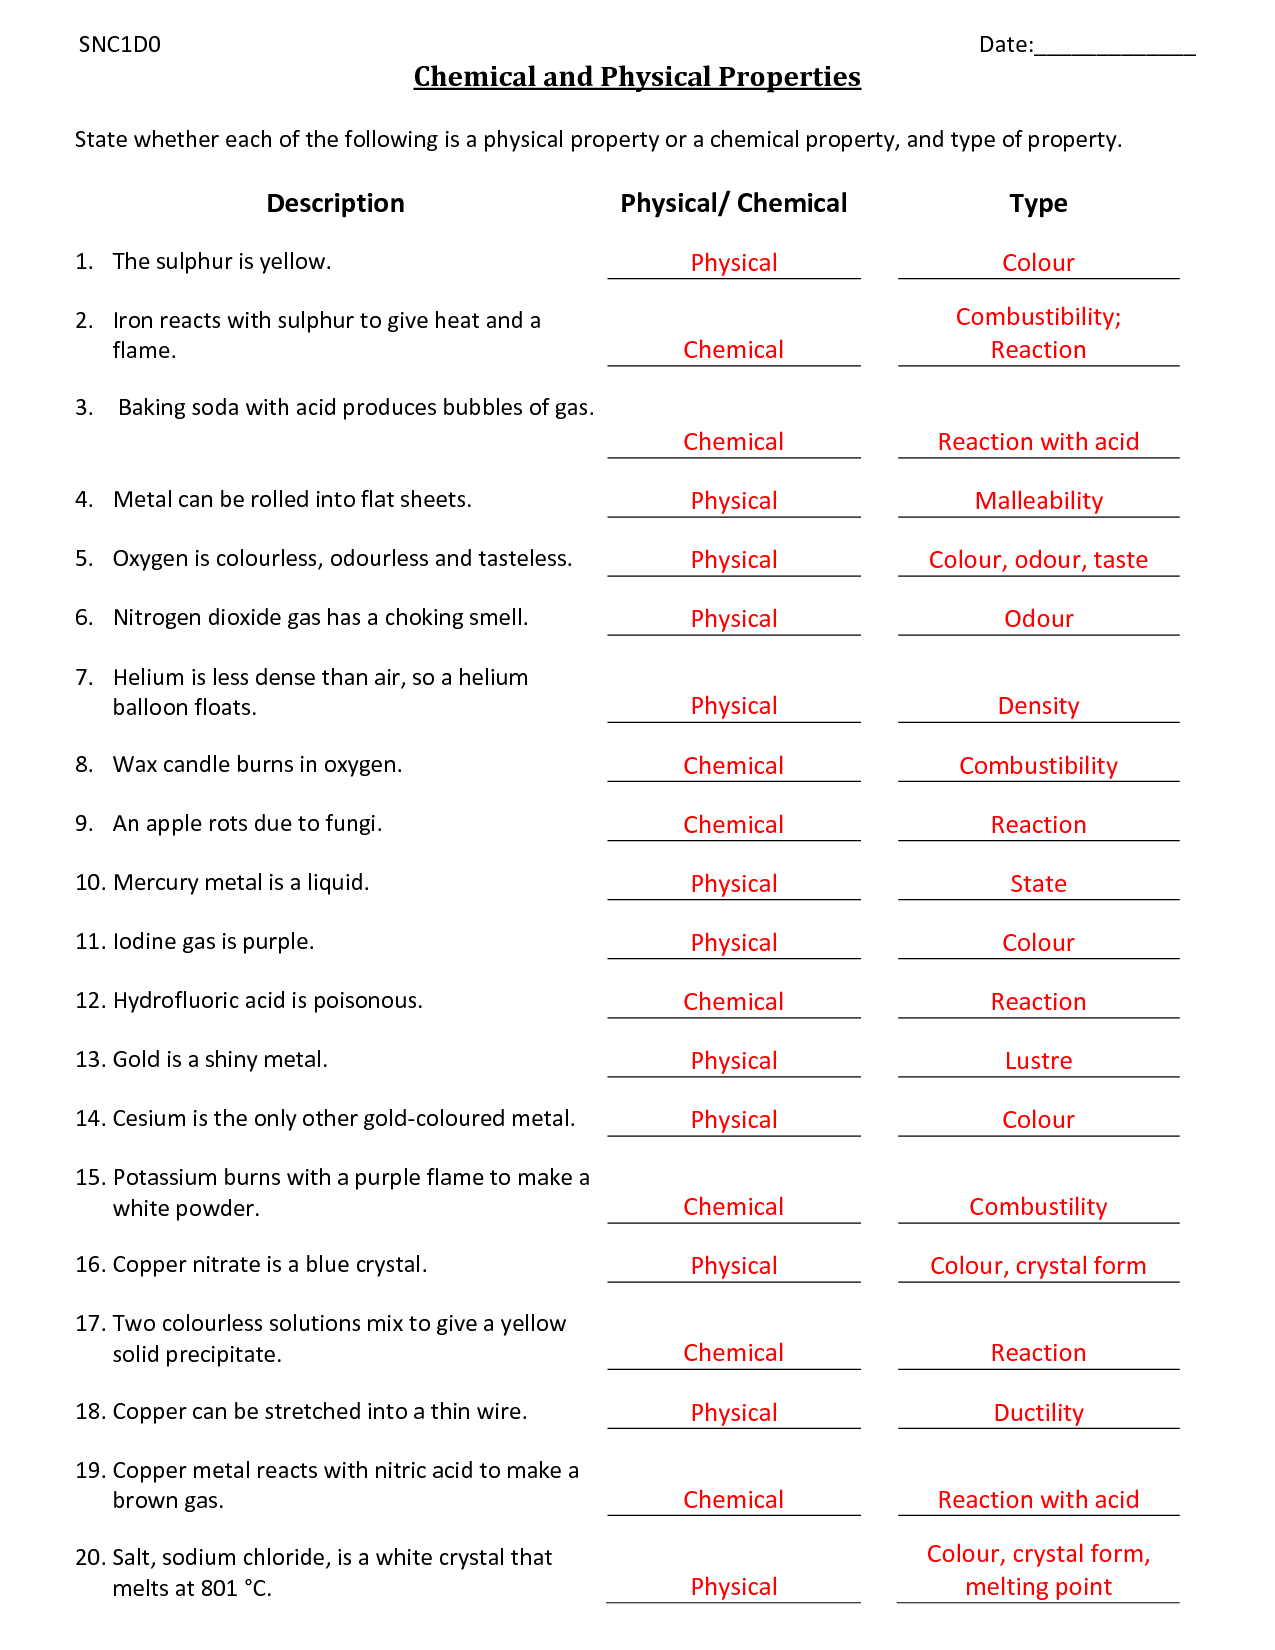 Physical Vs Chemical Properties Worksheets | Icp: Integrated - Free Printable Physics Worksheets